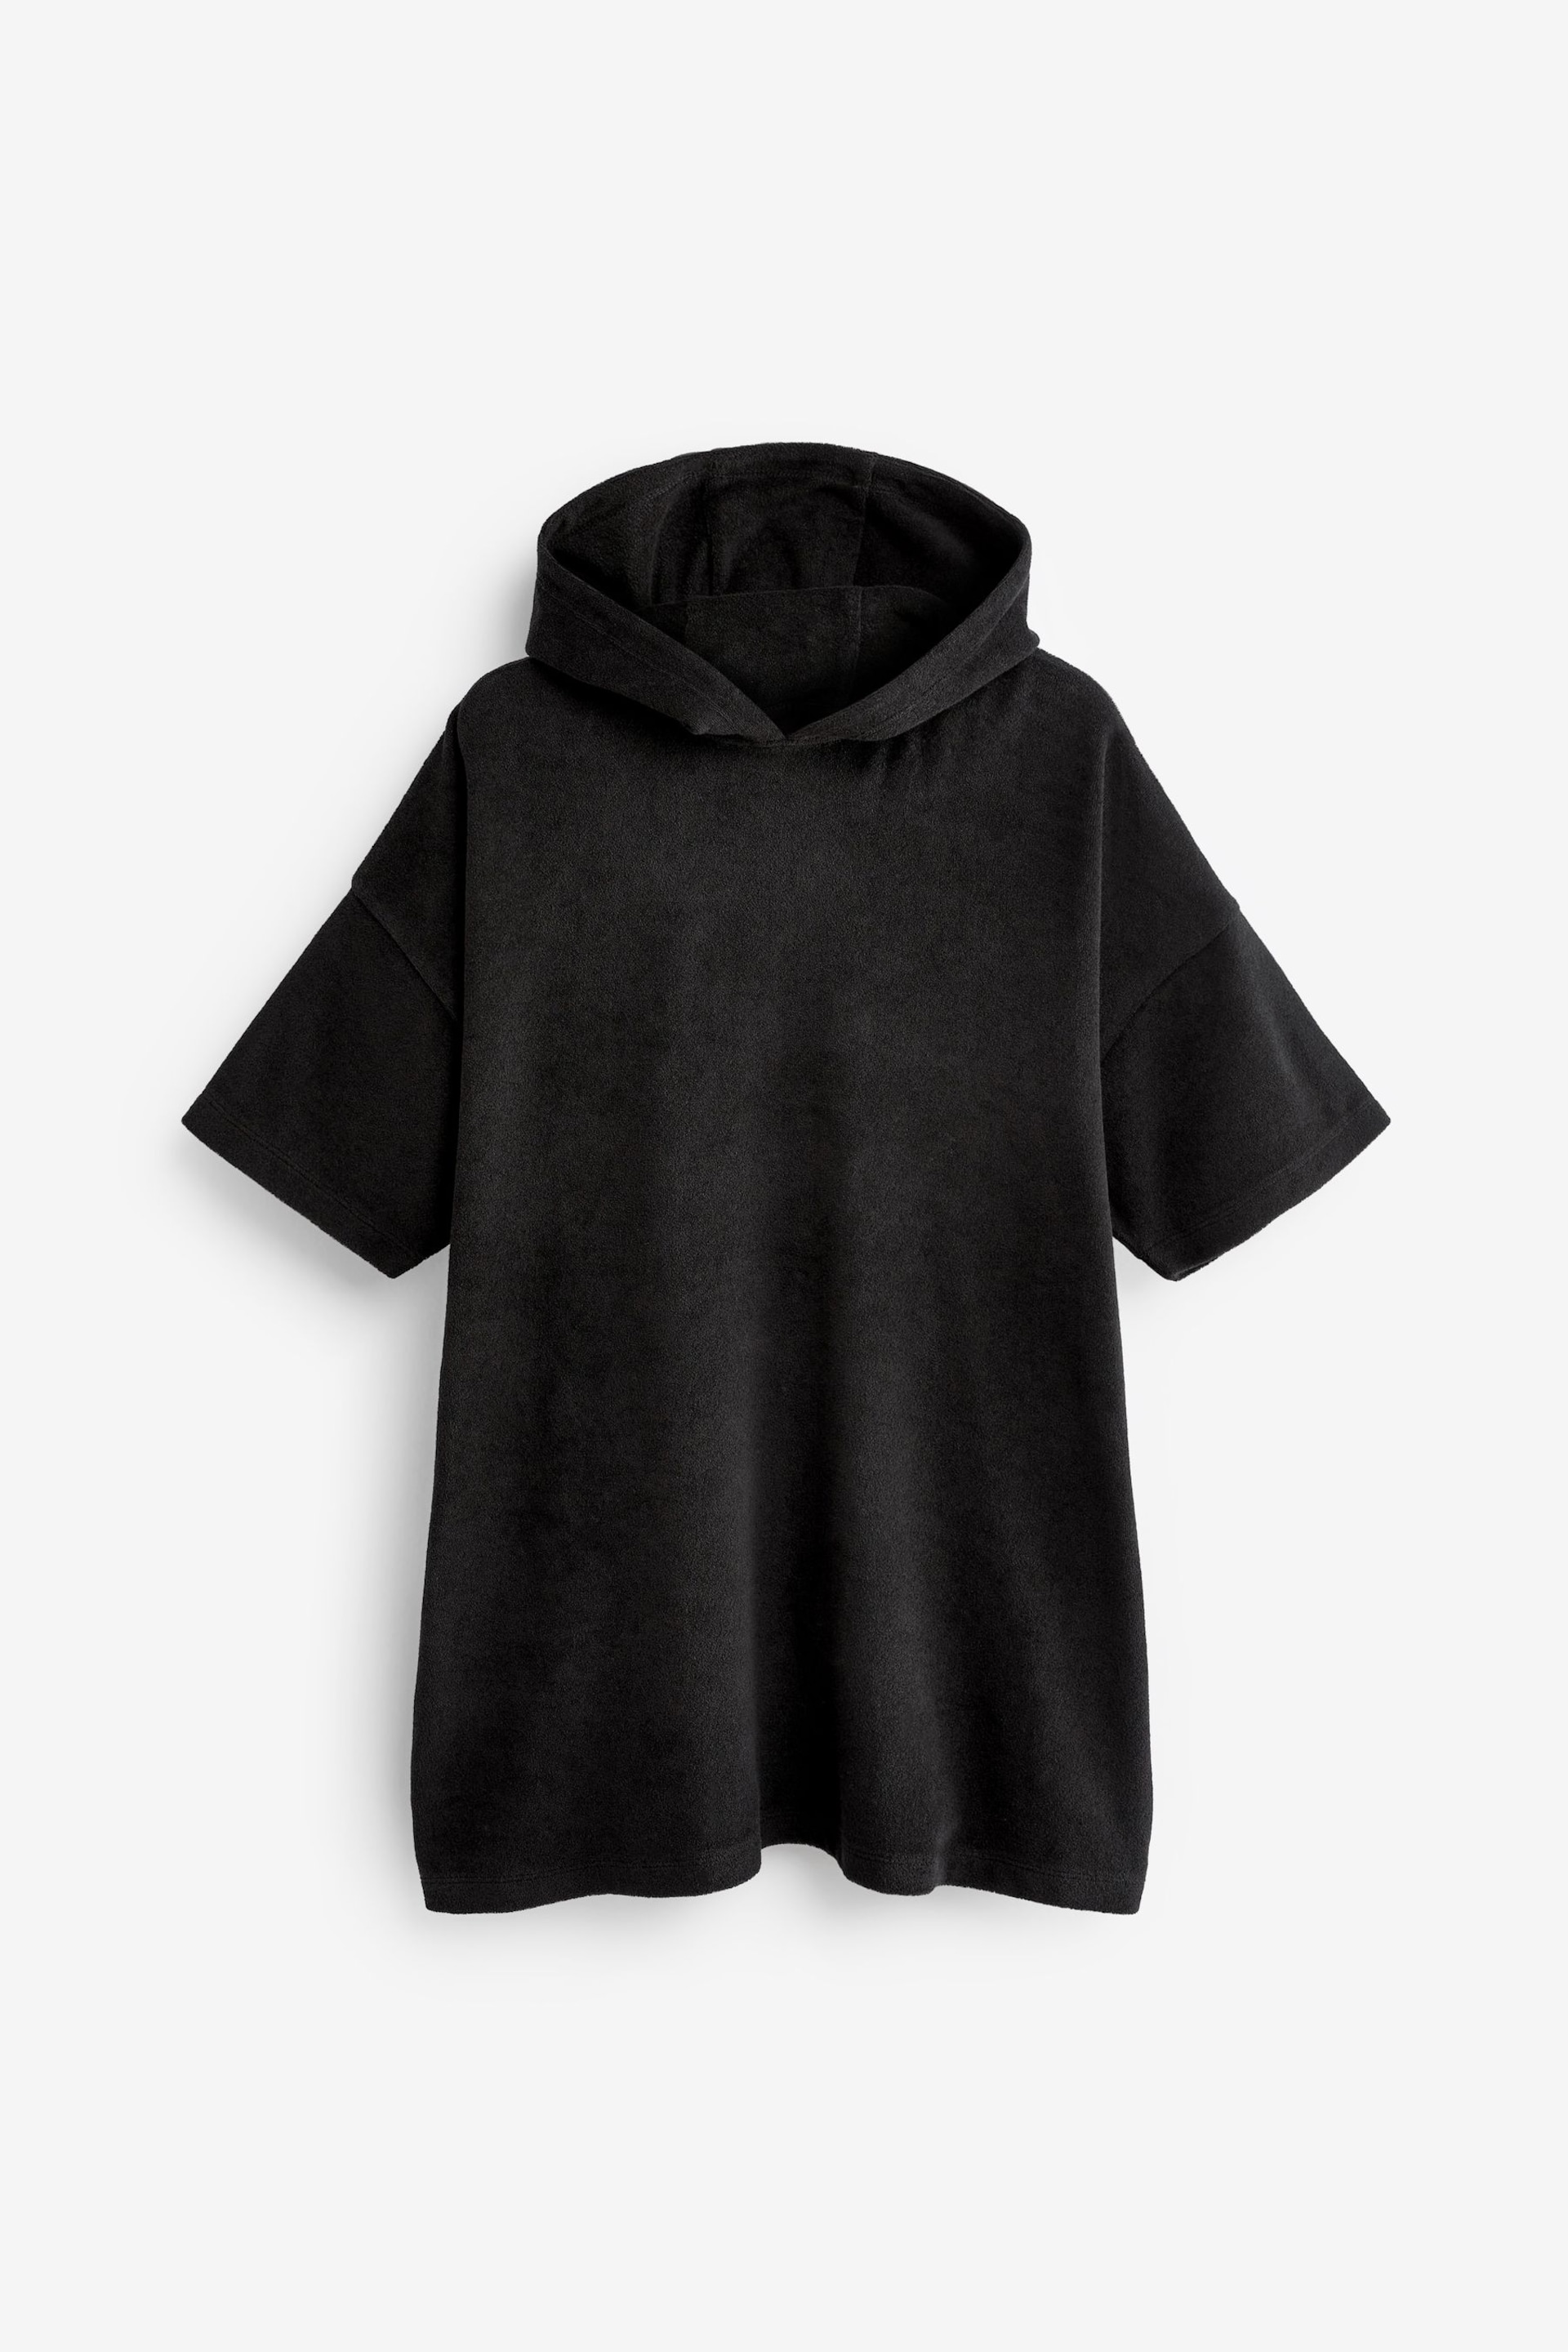 Black Oversized Hooded Towelling Cover-Up - Image 6 of 7